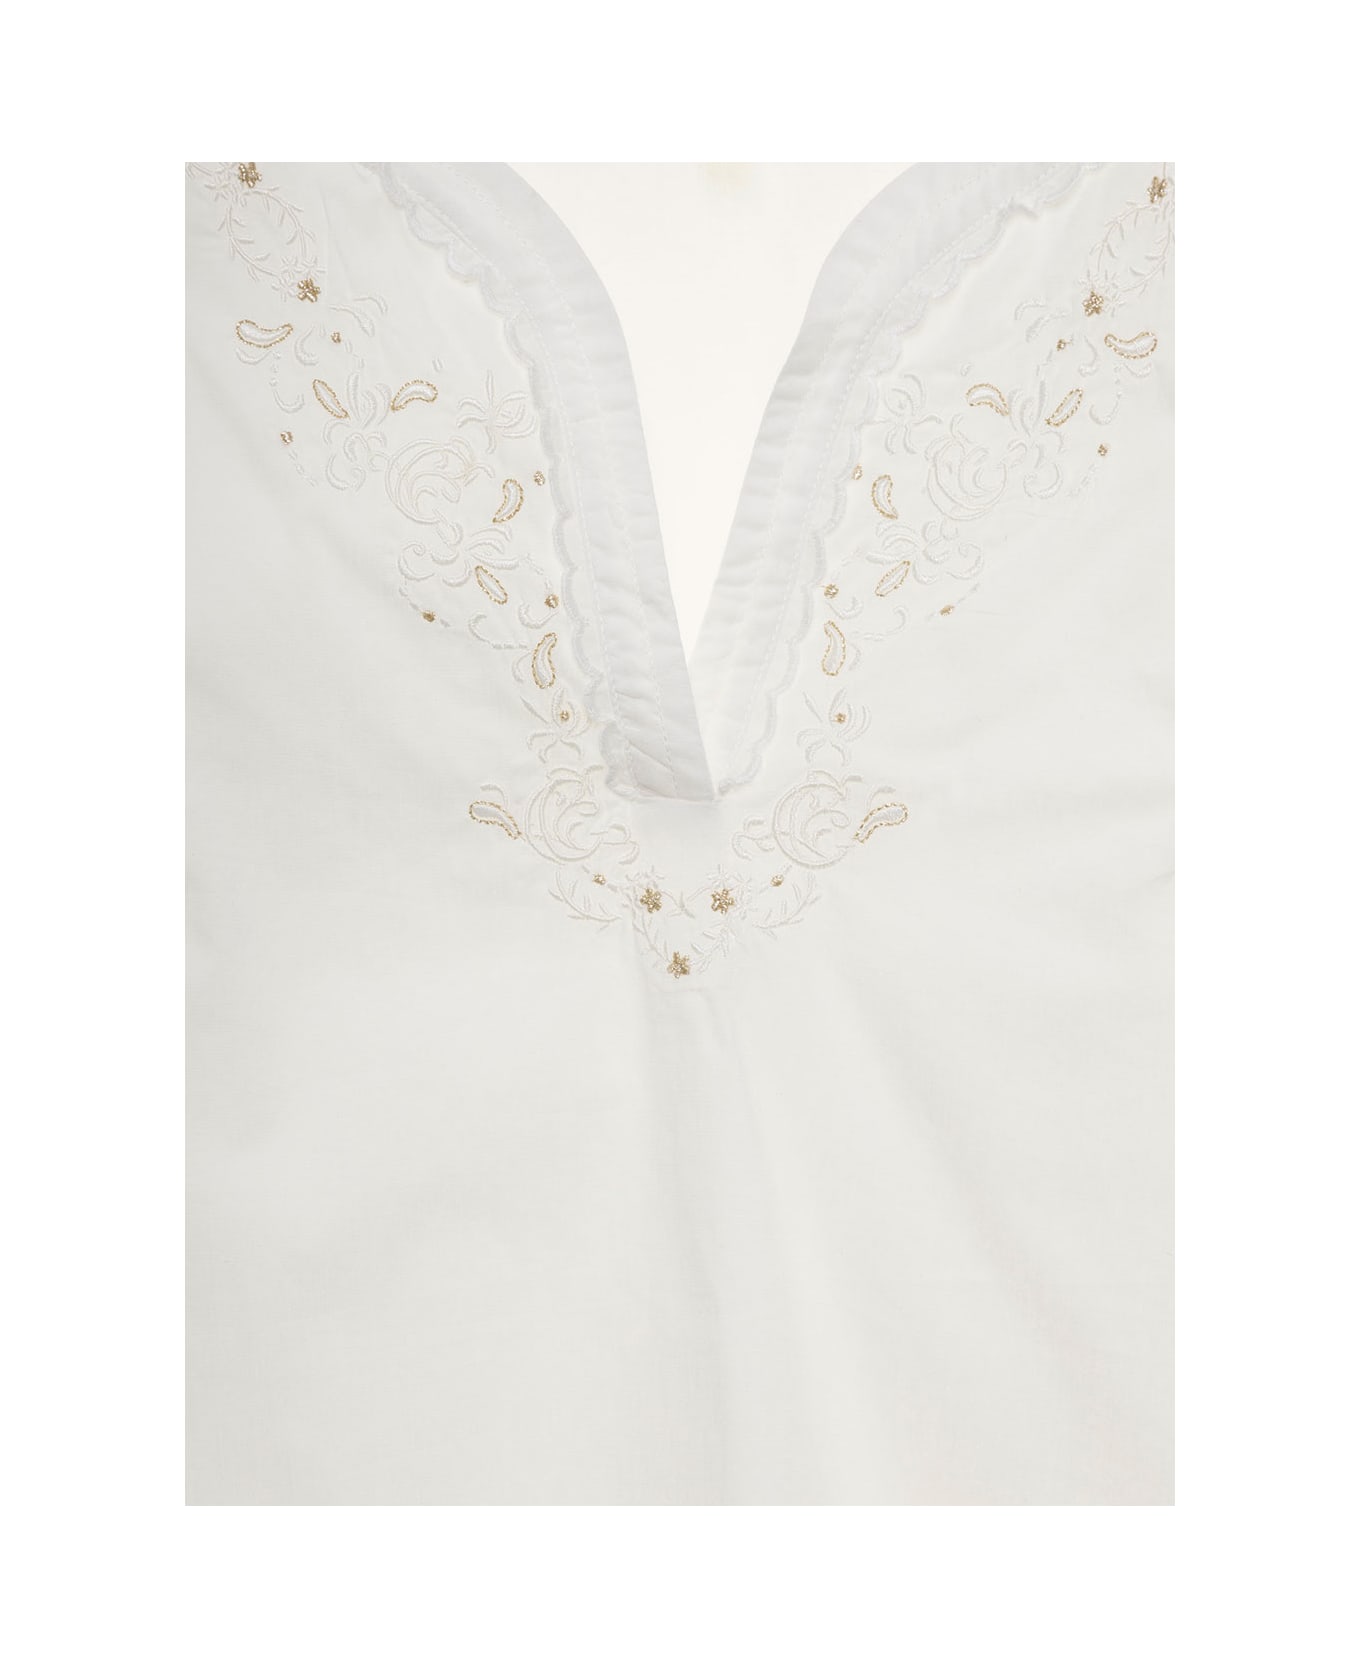 Chloé White Blouse With Puff Sleeves And Embroideries In Cotton Girl - White